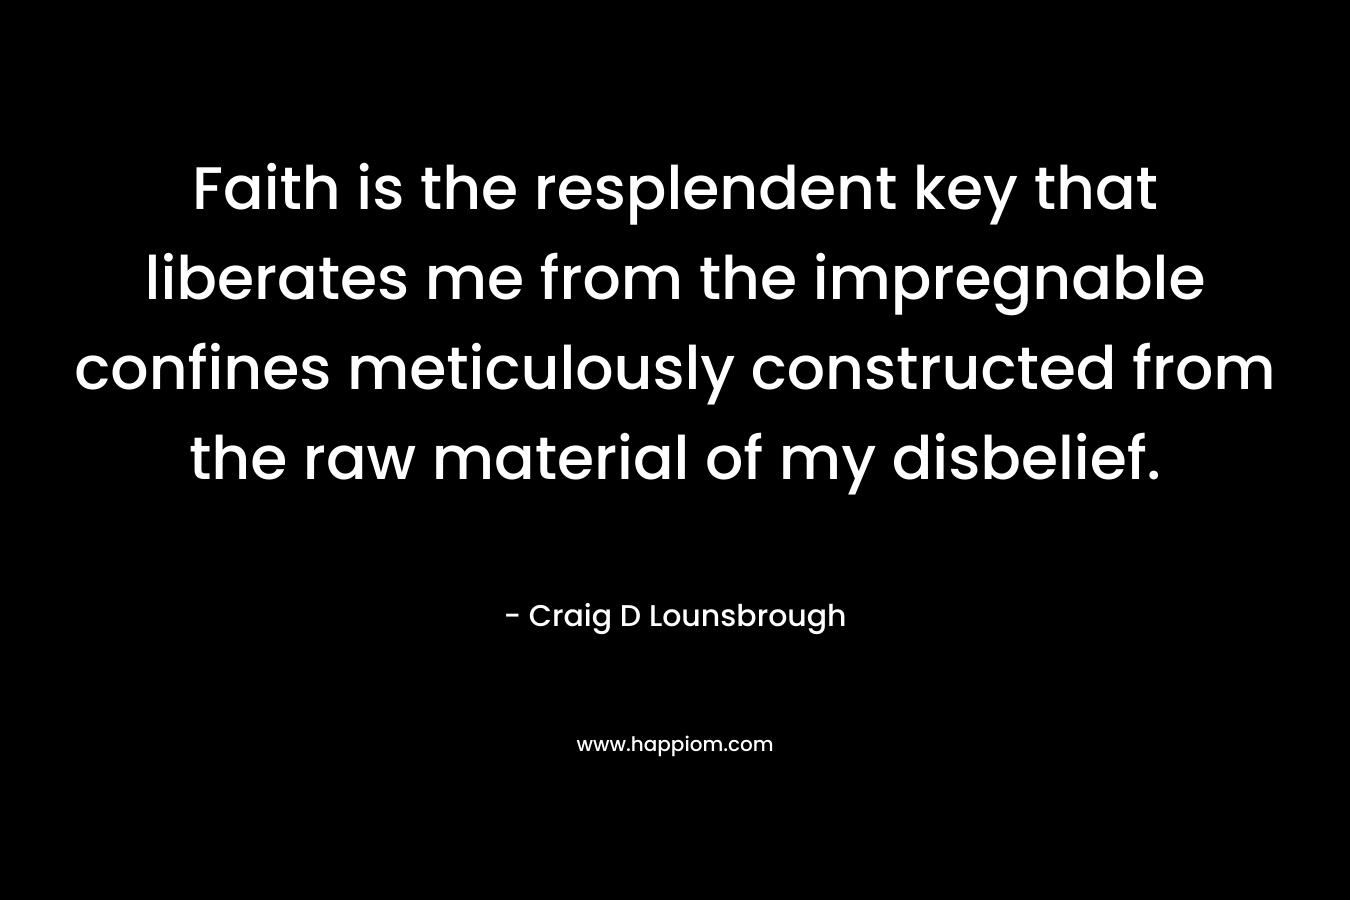 Faith is the resplendent key that liberates me from the impregnable confines meticulously constructed from the raw material of my disbelief. – Craig D Lounsbrough